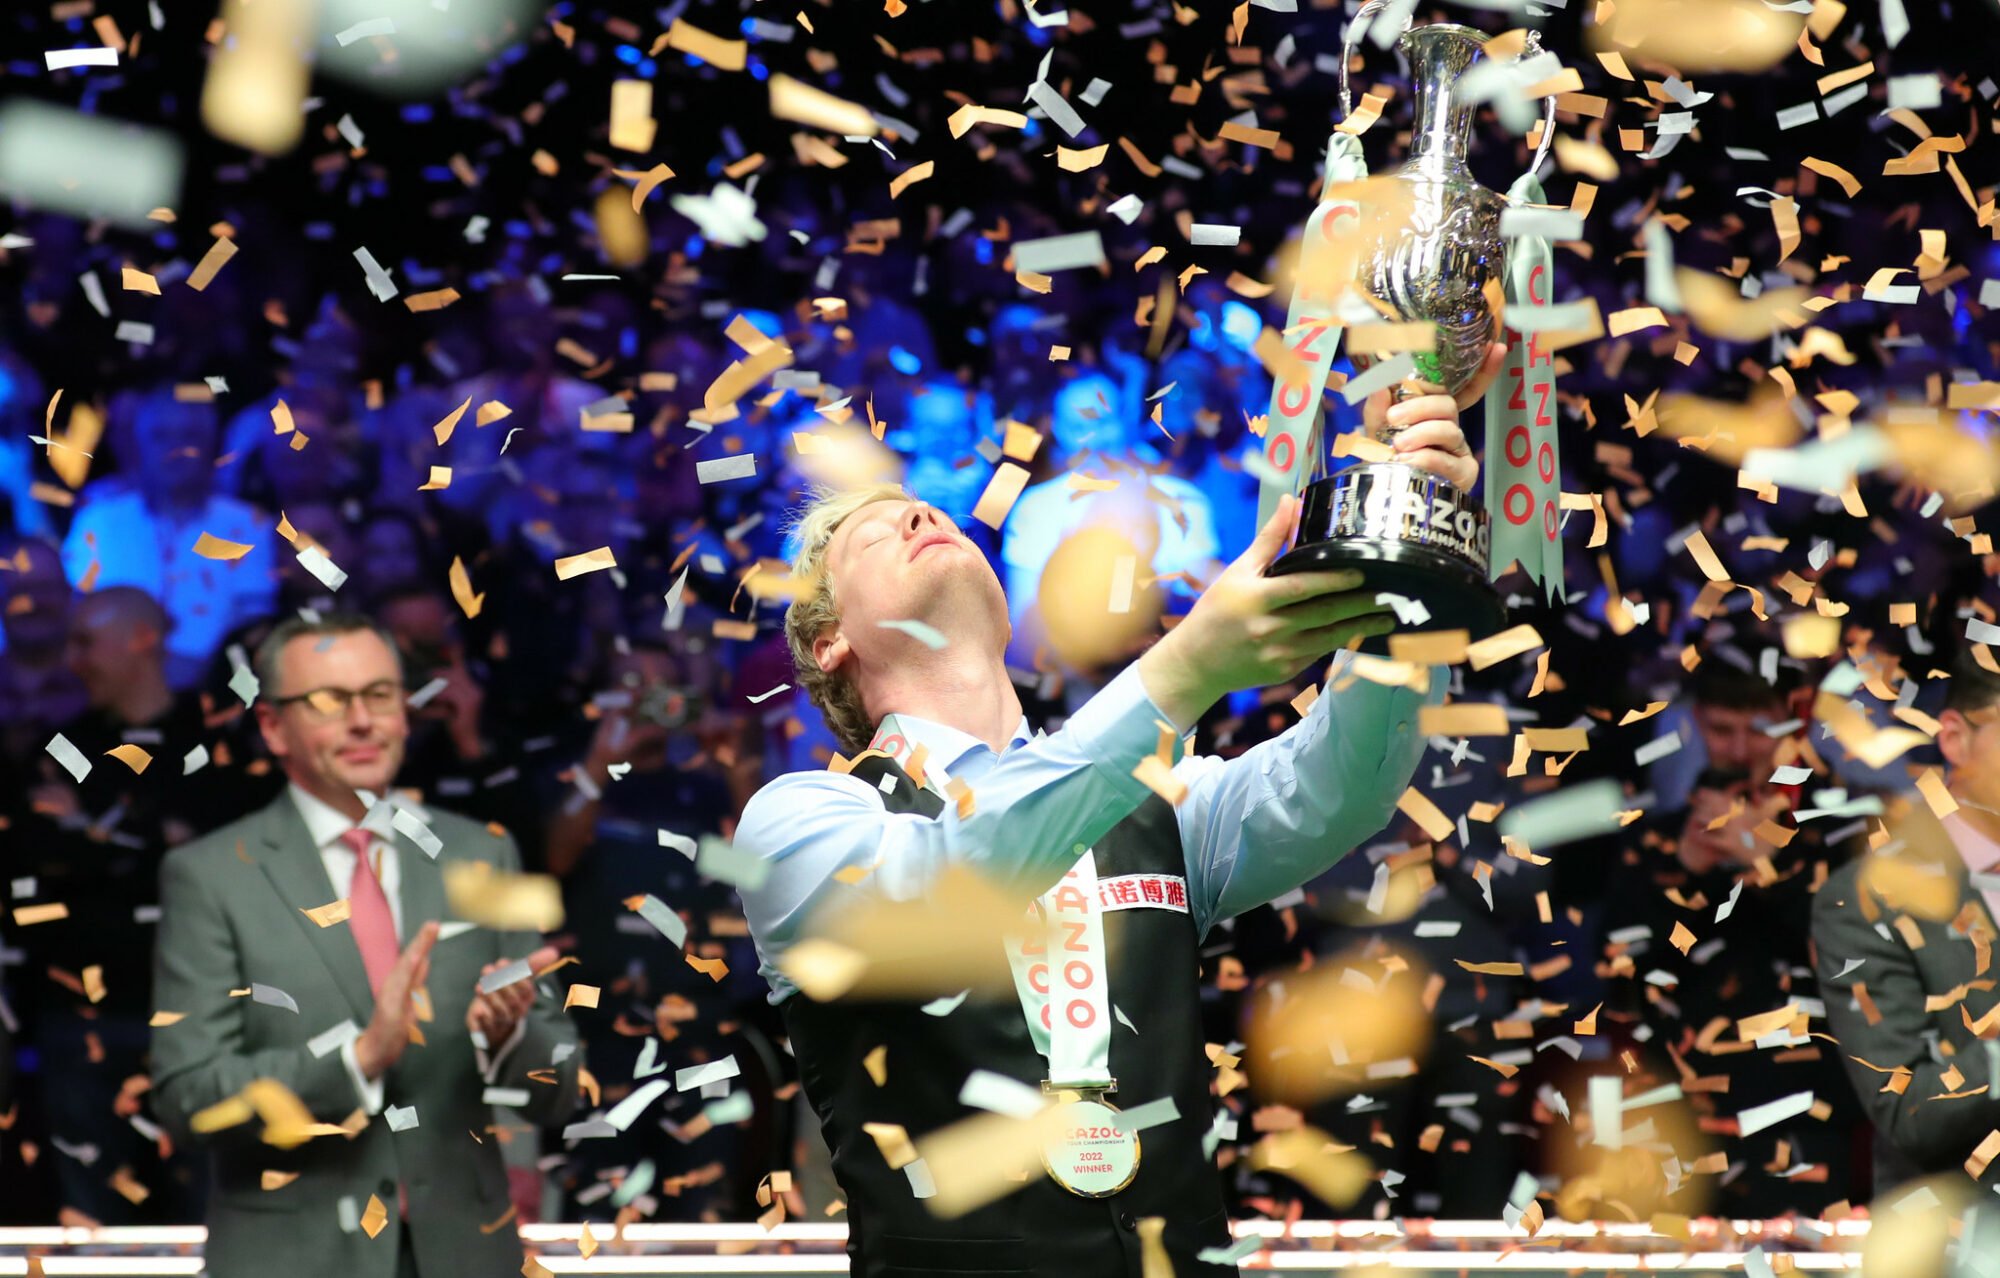 Image name neil robertson winning the snooker tour championship the 1 image from the post Snooker Tour Championship coming to Hull in 2023 in Yorkshire.com.